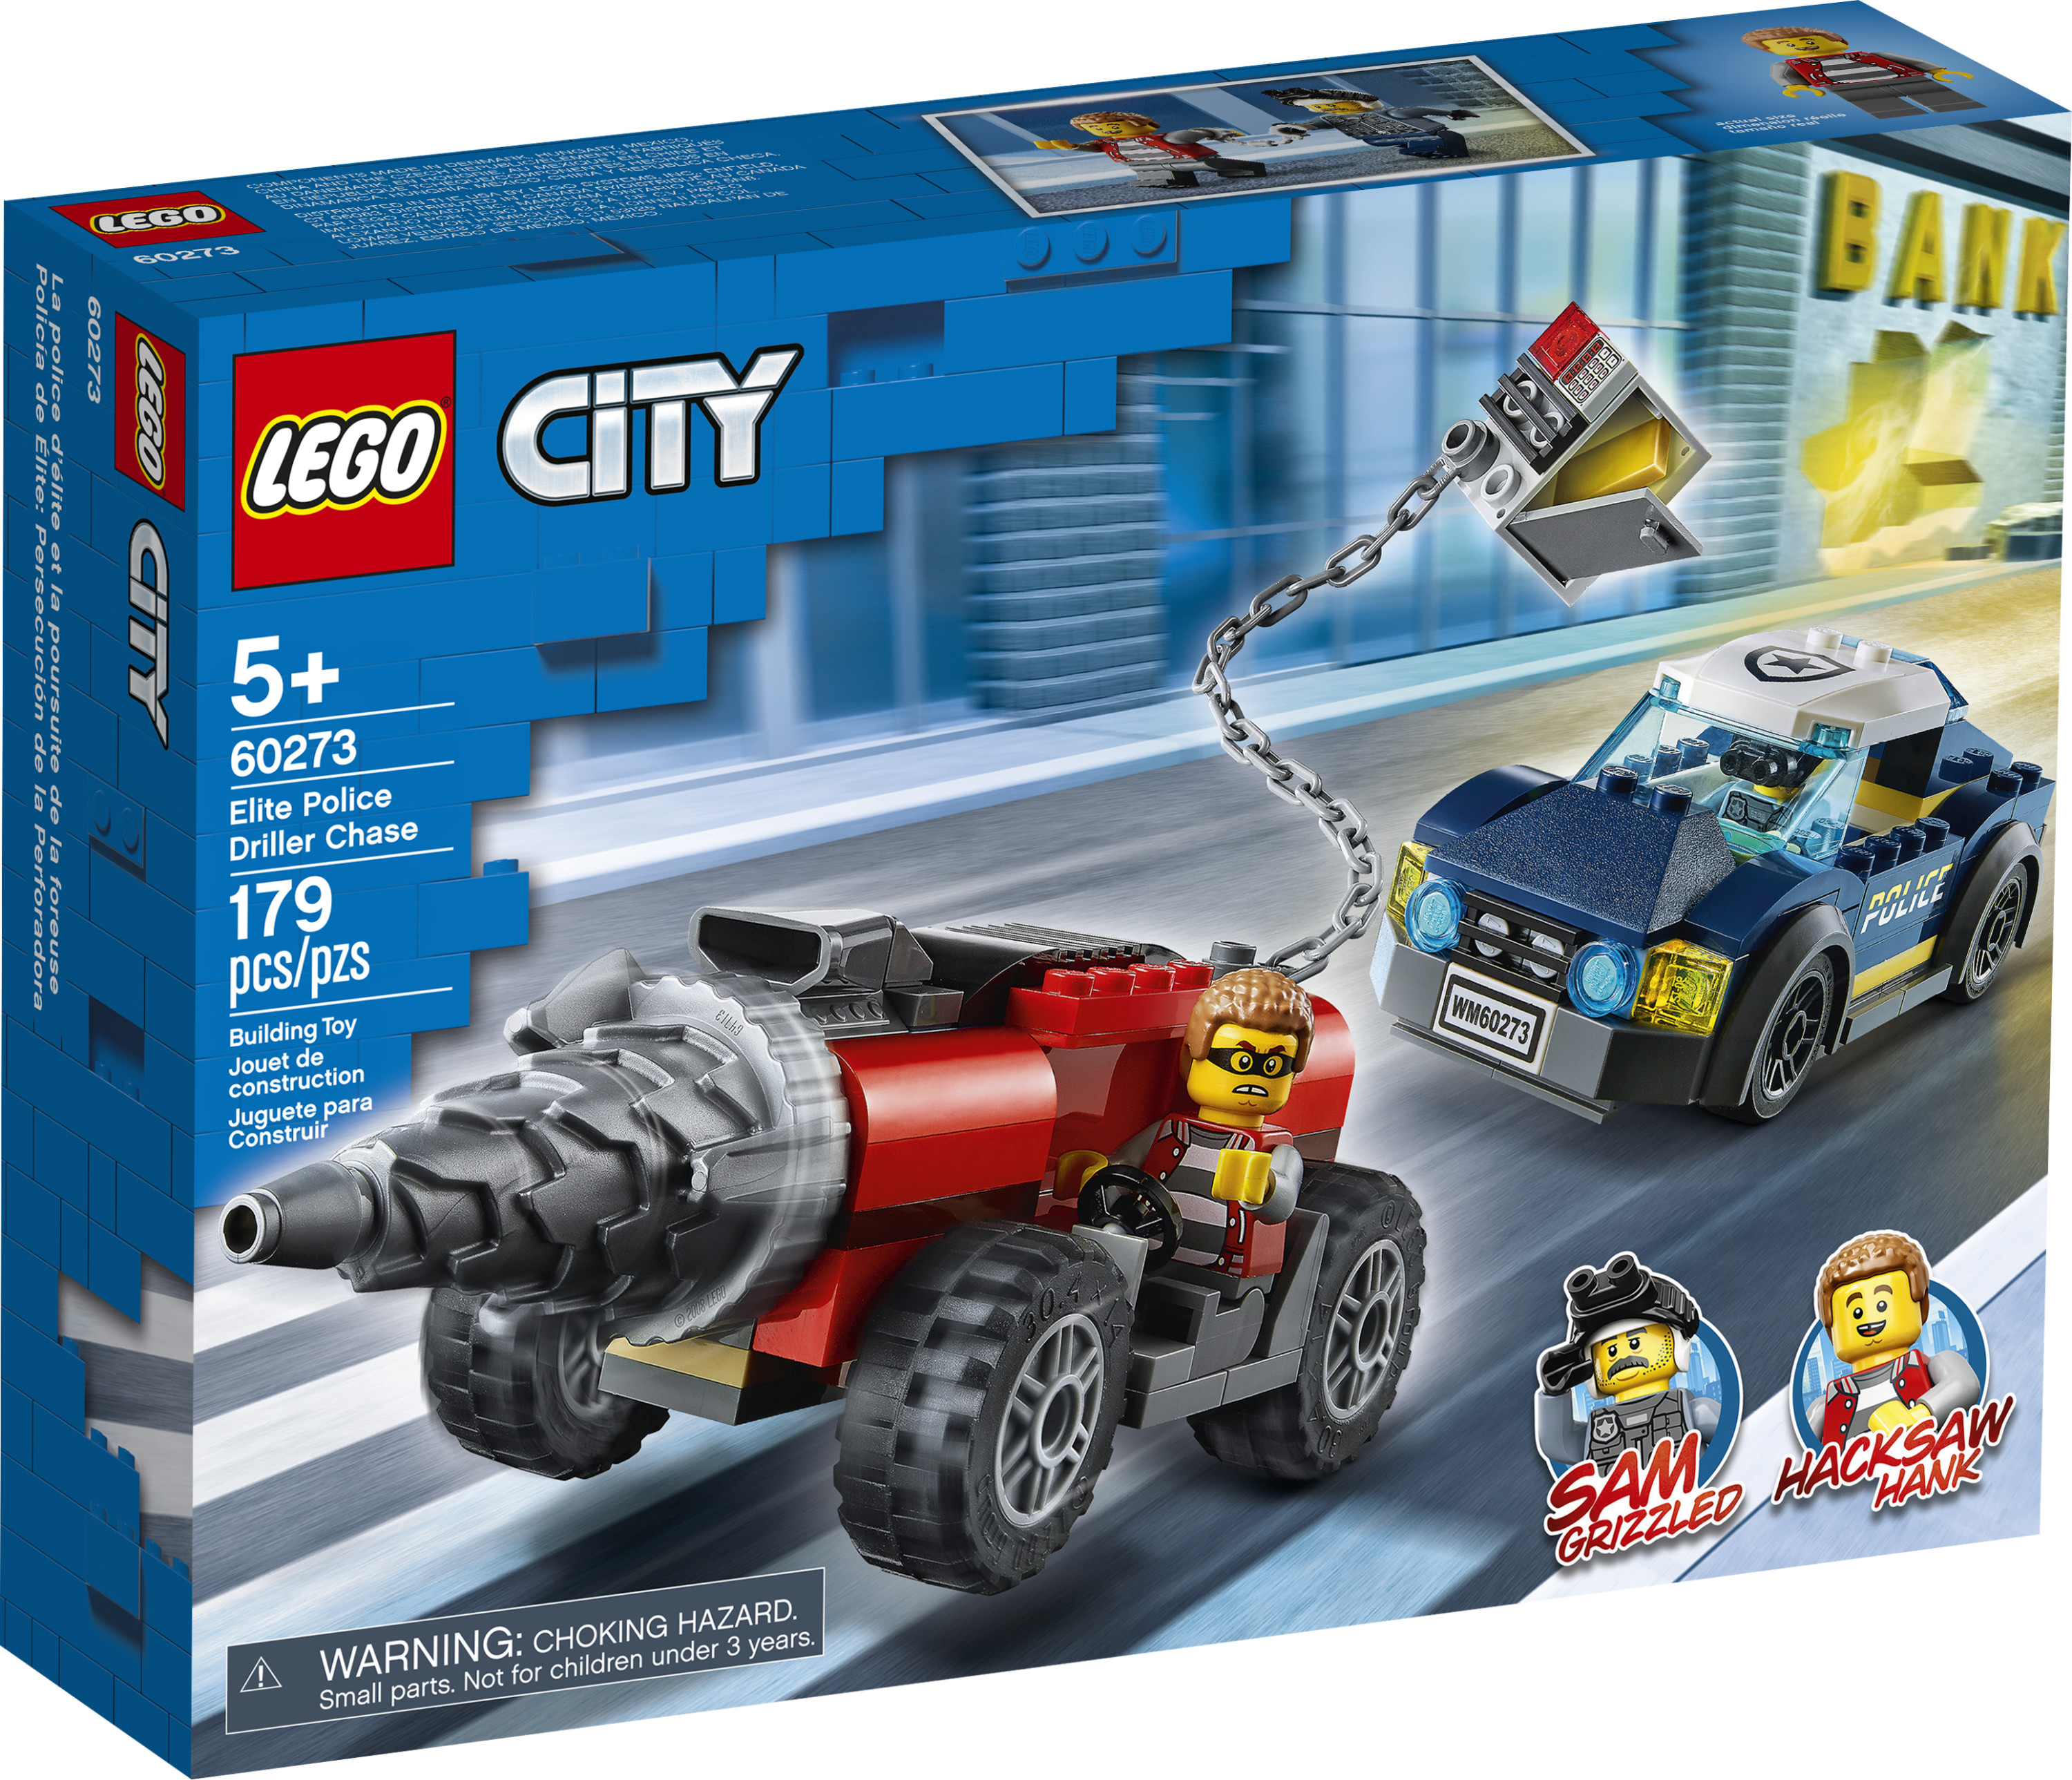 LEGO City Police Police Driller Chase 60273 - image 5 of 8